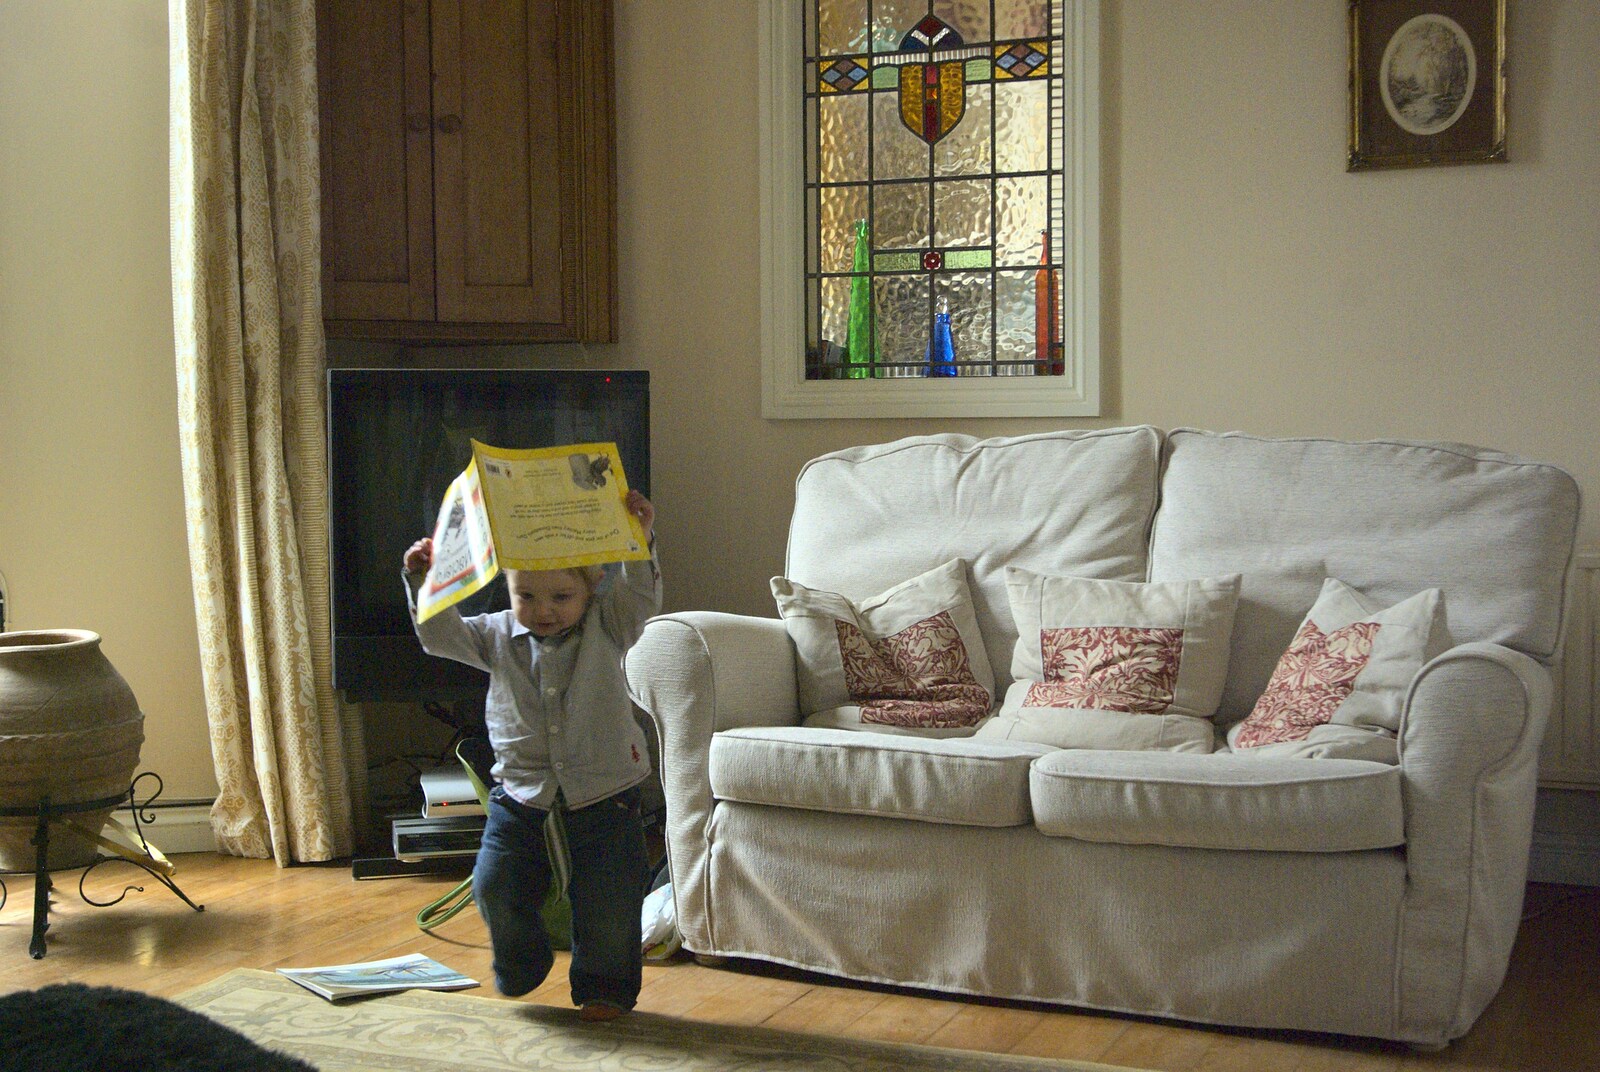 Fred's got a book on his head from Easter in Chagford and Hoo Meavy, Devon - 3rd April 2010